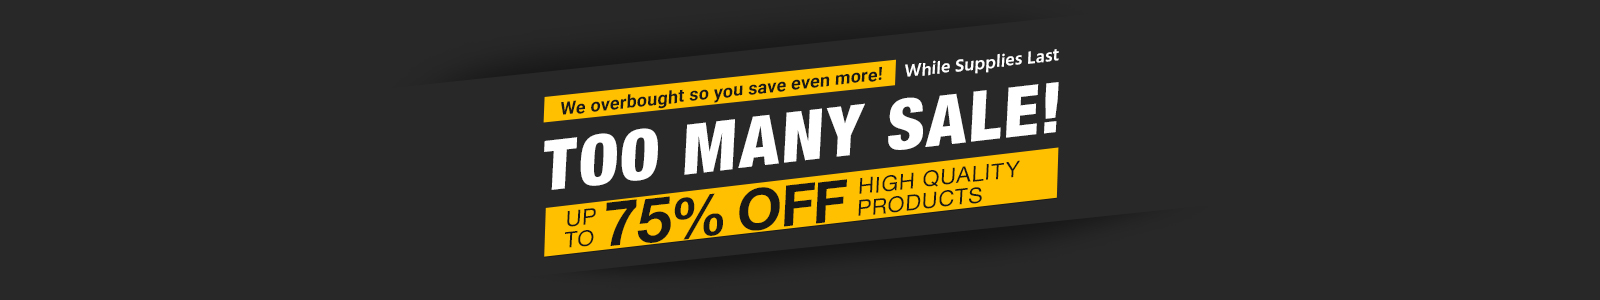 The Too Many Sale!
We overbought so you save even more! 
Up to 85% off high quality products
While Supplies Last
Shop Now